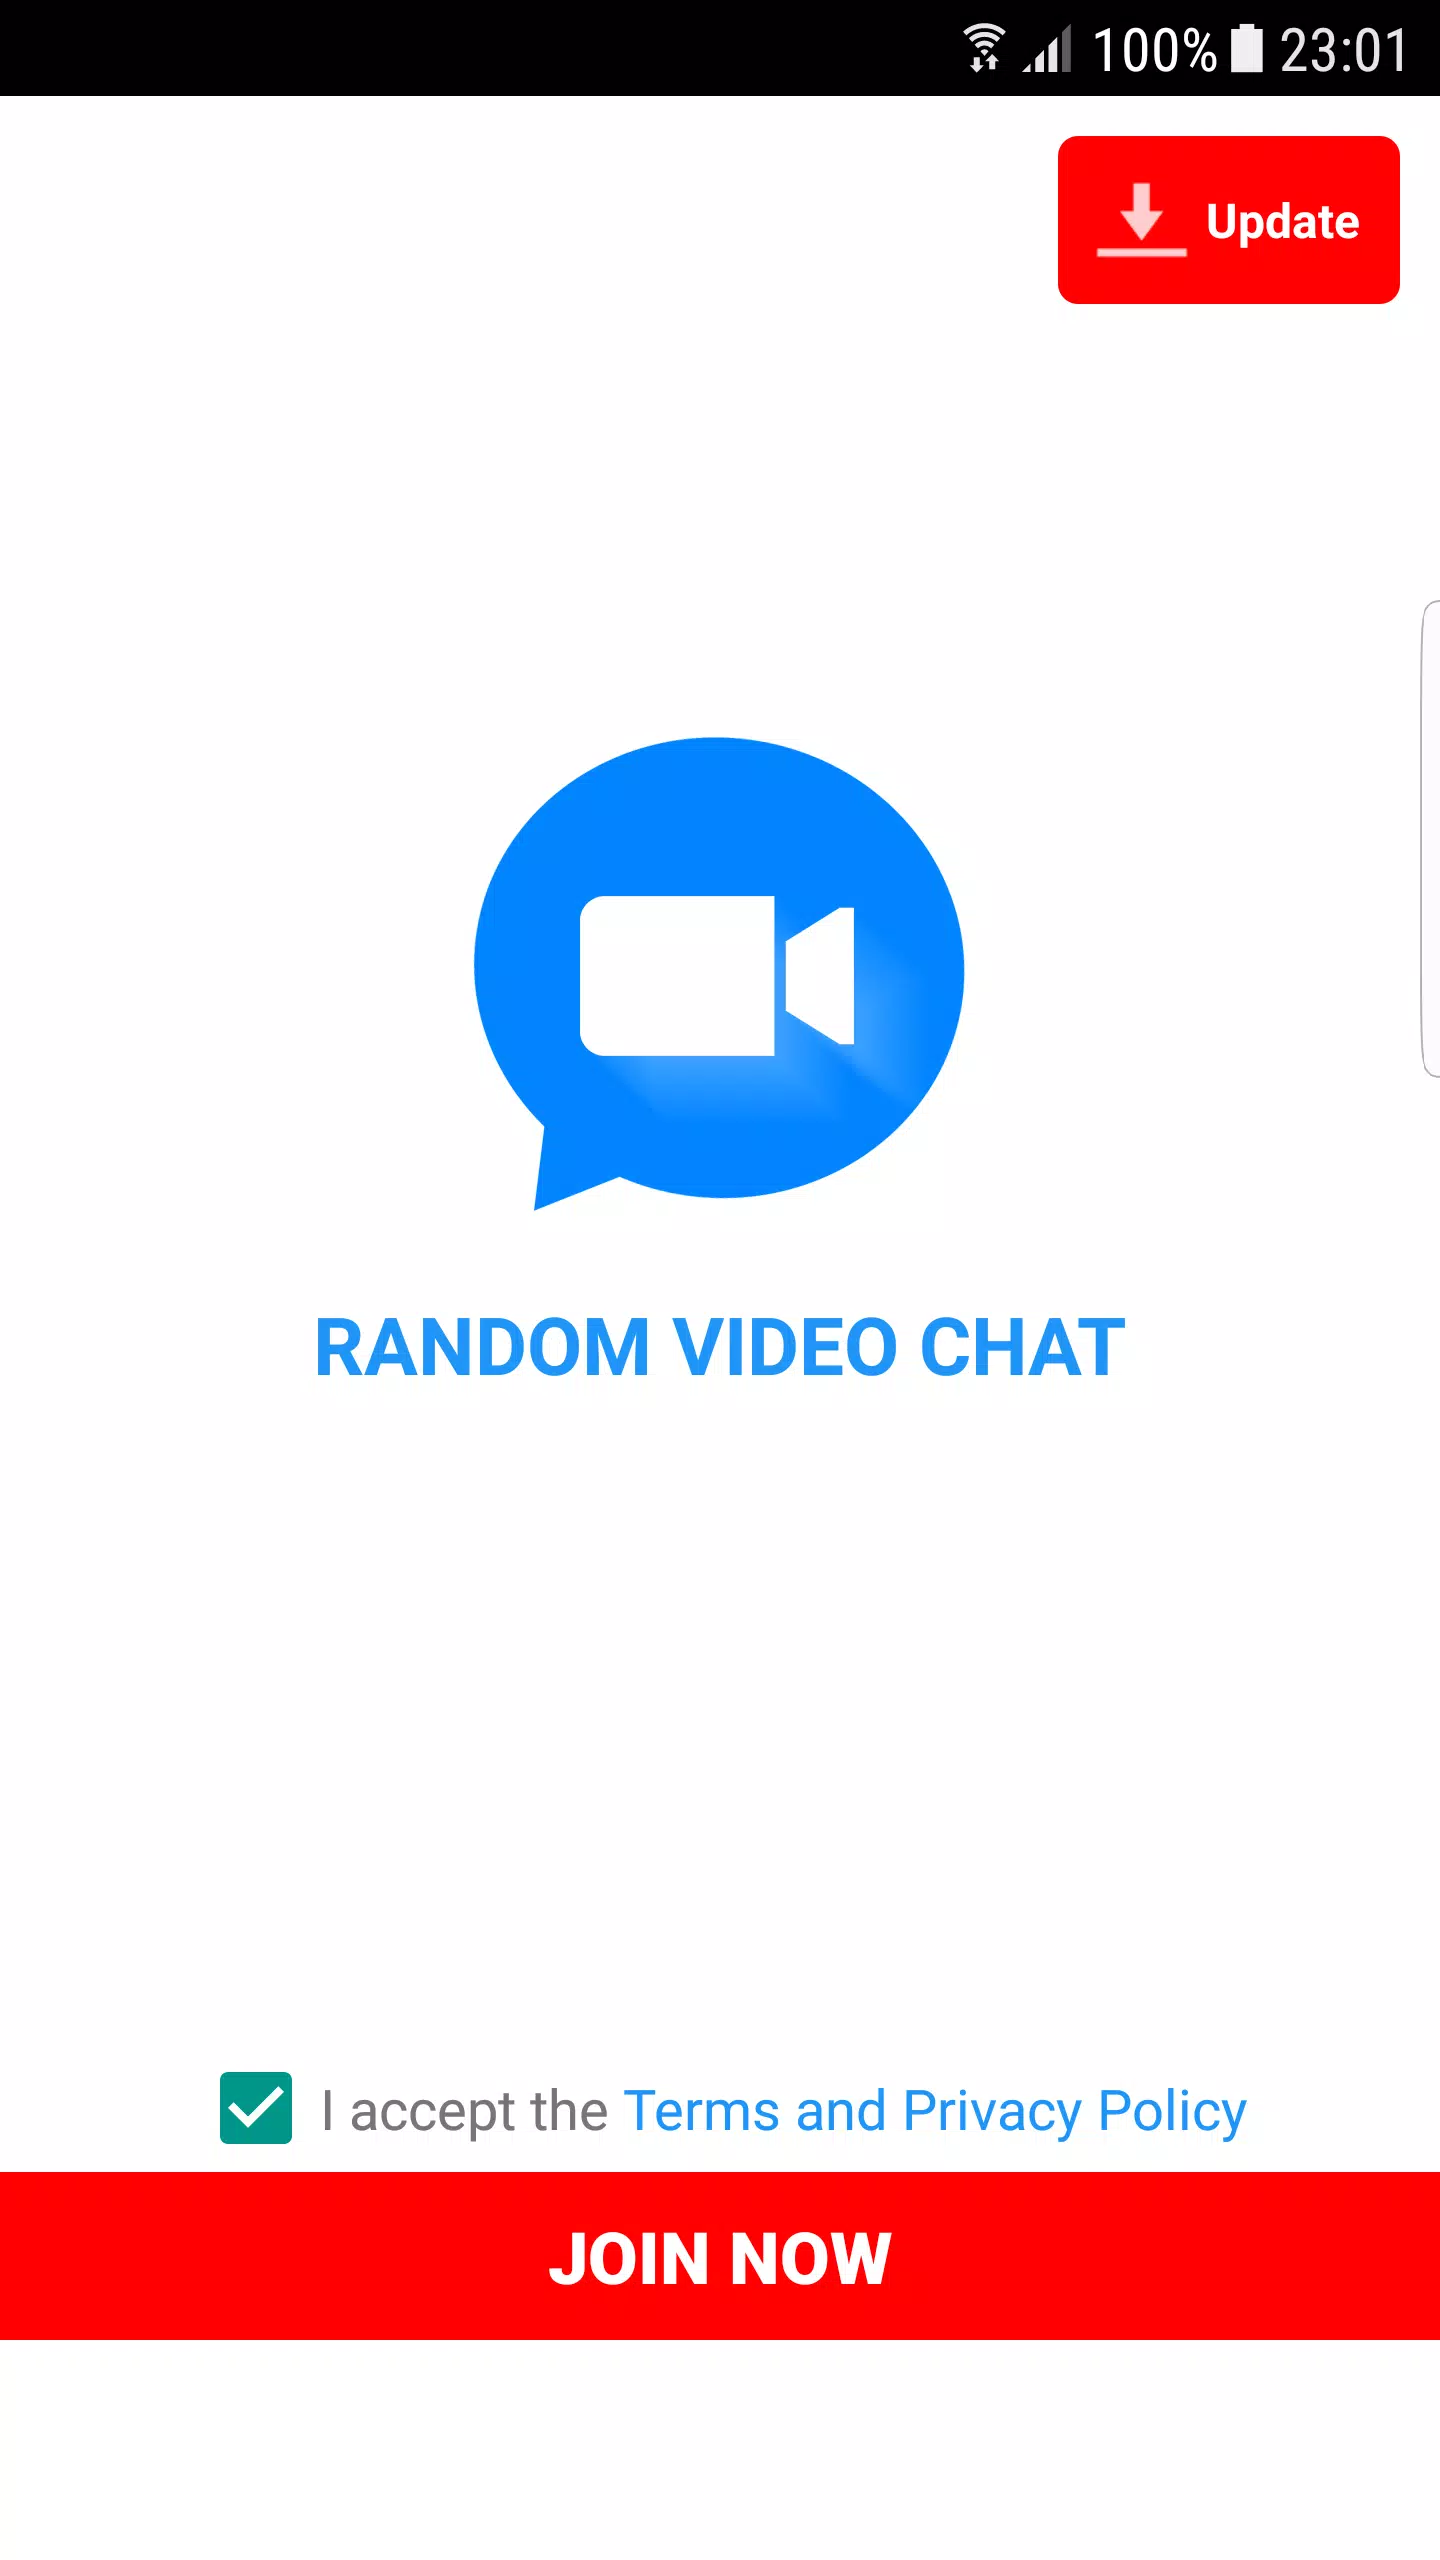 Electric video chat